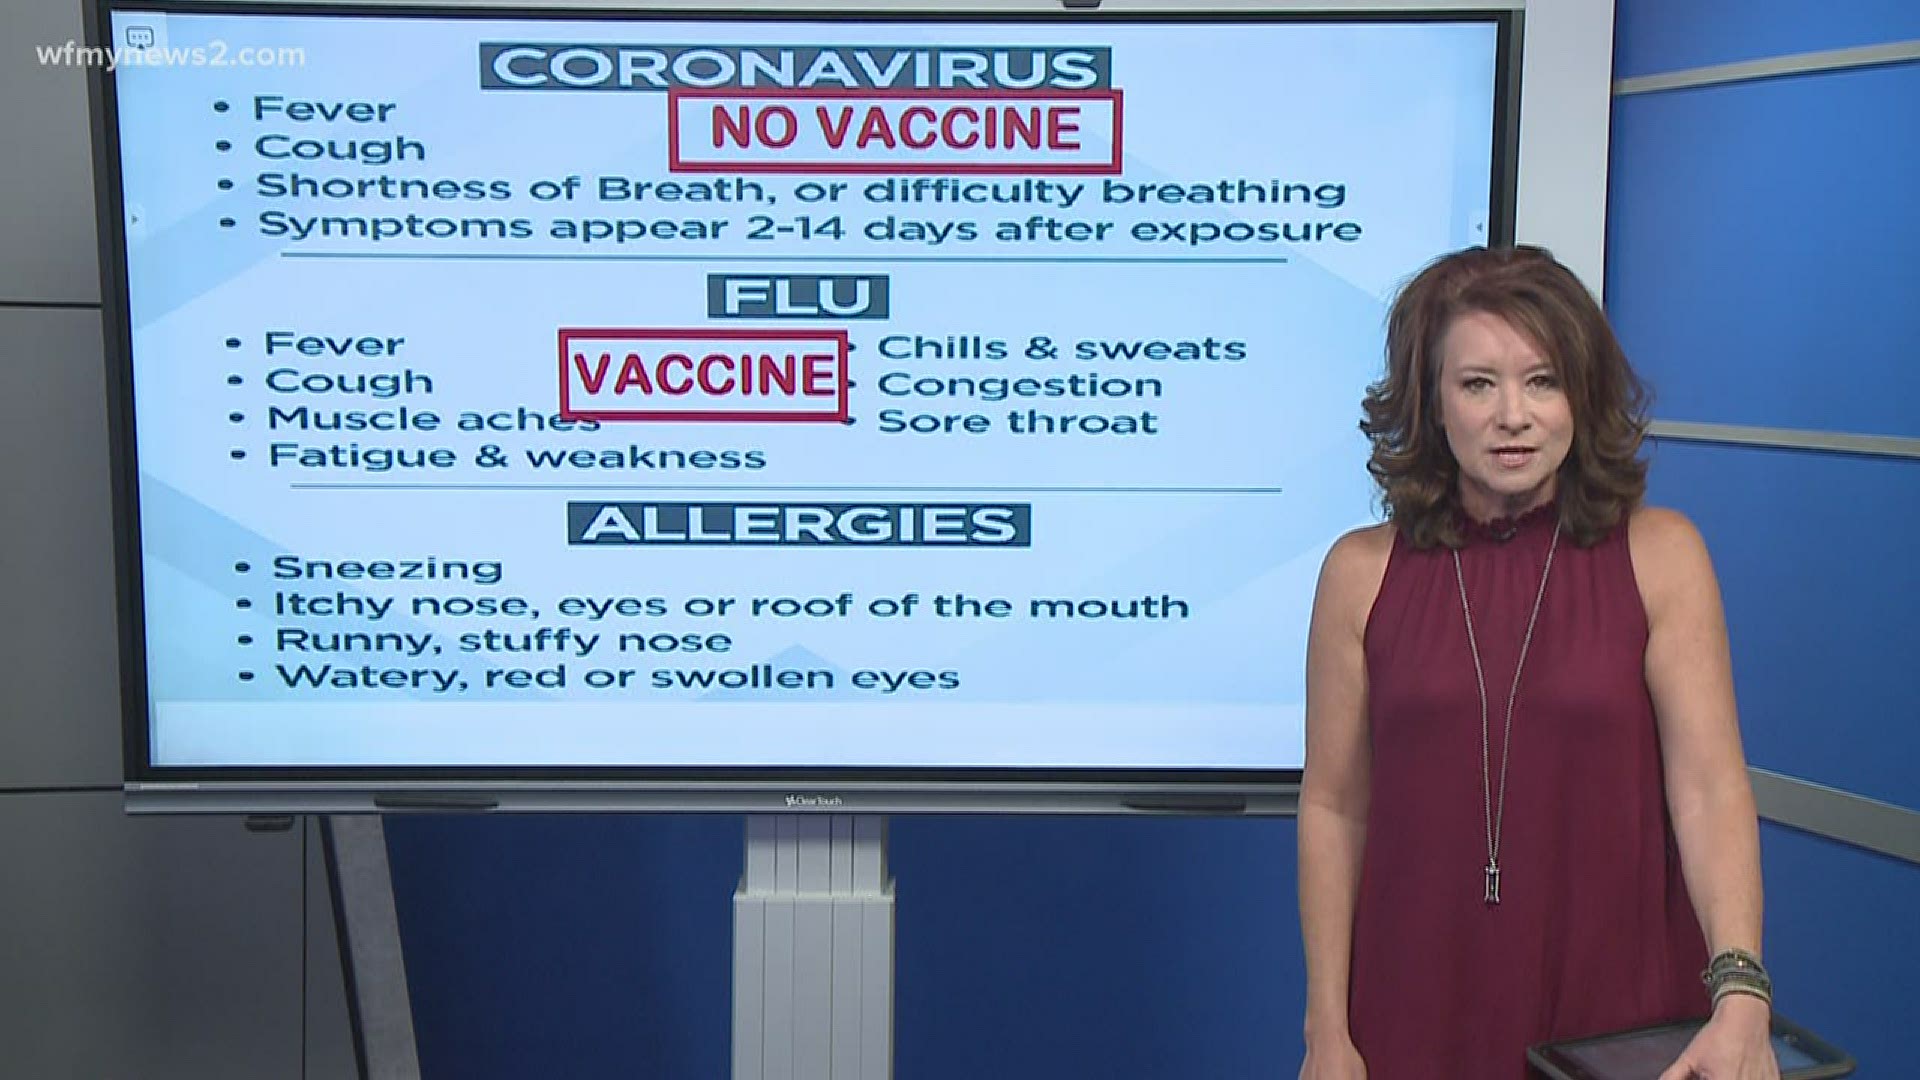 A flu shot does not prevent the coronavirus, though it has indirect benefits that can save time, resources and lives.